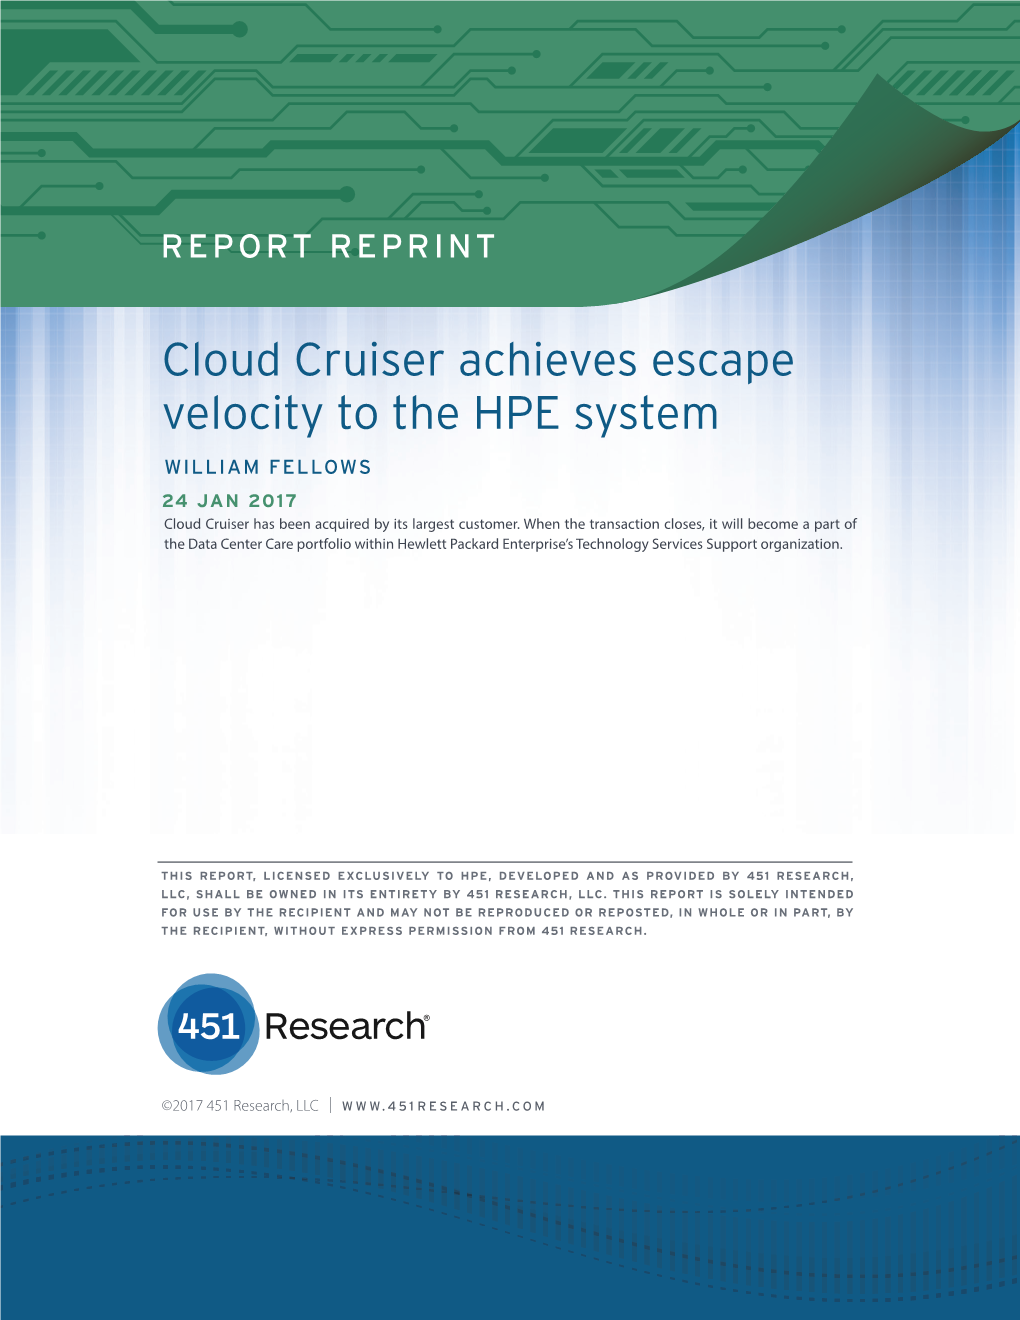 Cloud Cruiser Achieves Escape Velocity to the HPE System WILLIAM FELLOWS 24 JAN 2017 Cloud Cruiser Has Been Acquired by Its Largest Customer